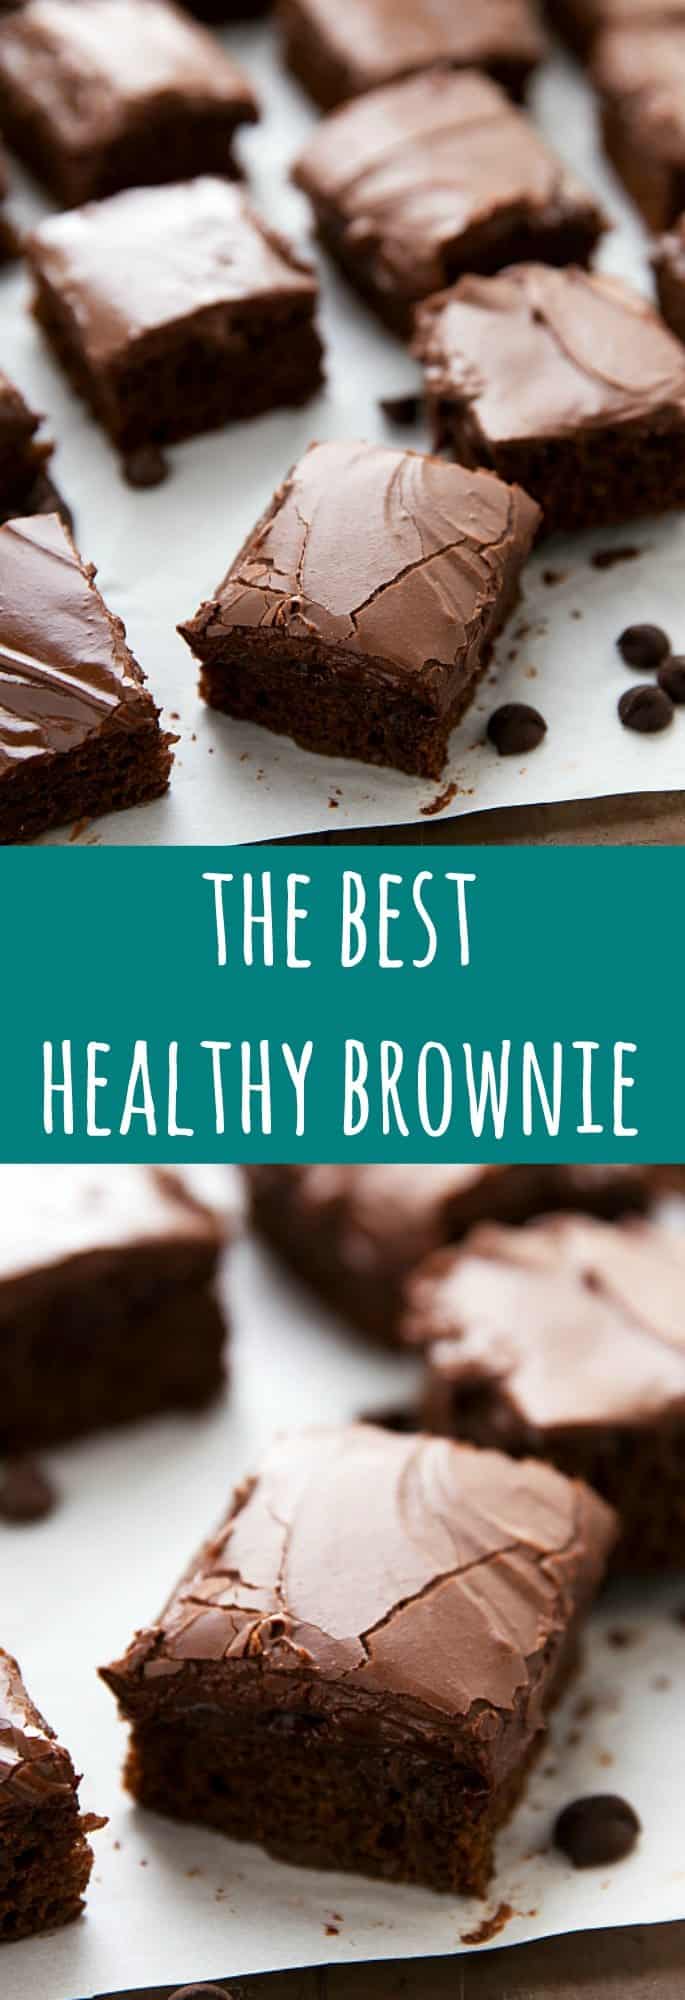 The BEST healthy brownies with no flour, no refined white sugar, no butter, and no eggs. These delicious healthier brownies are easy to make and include an optional frosting recipe made using Greek yogurt!